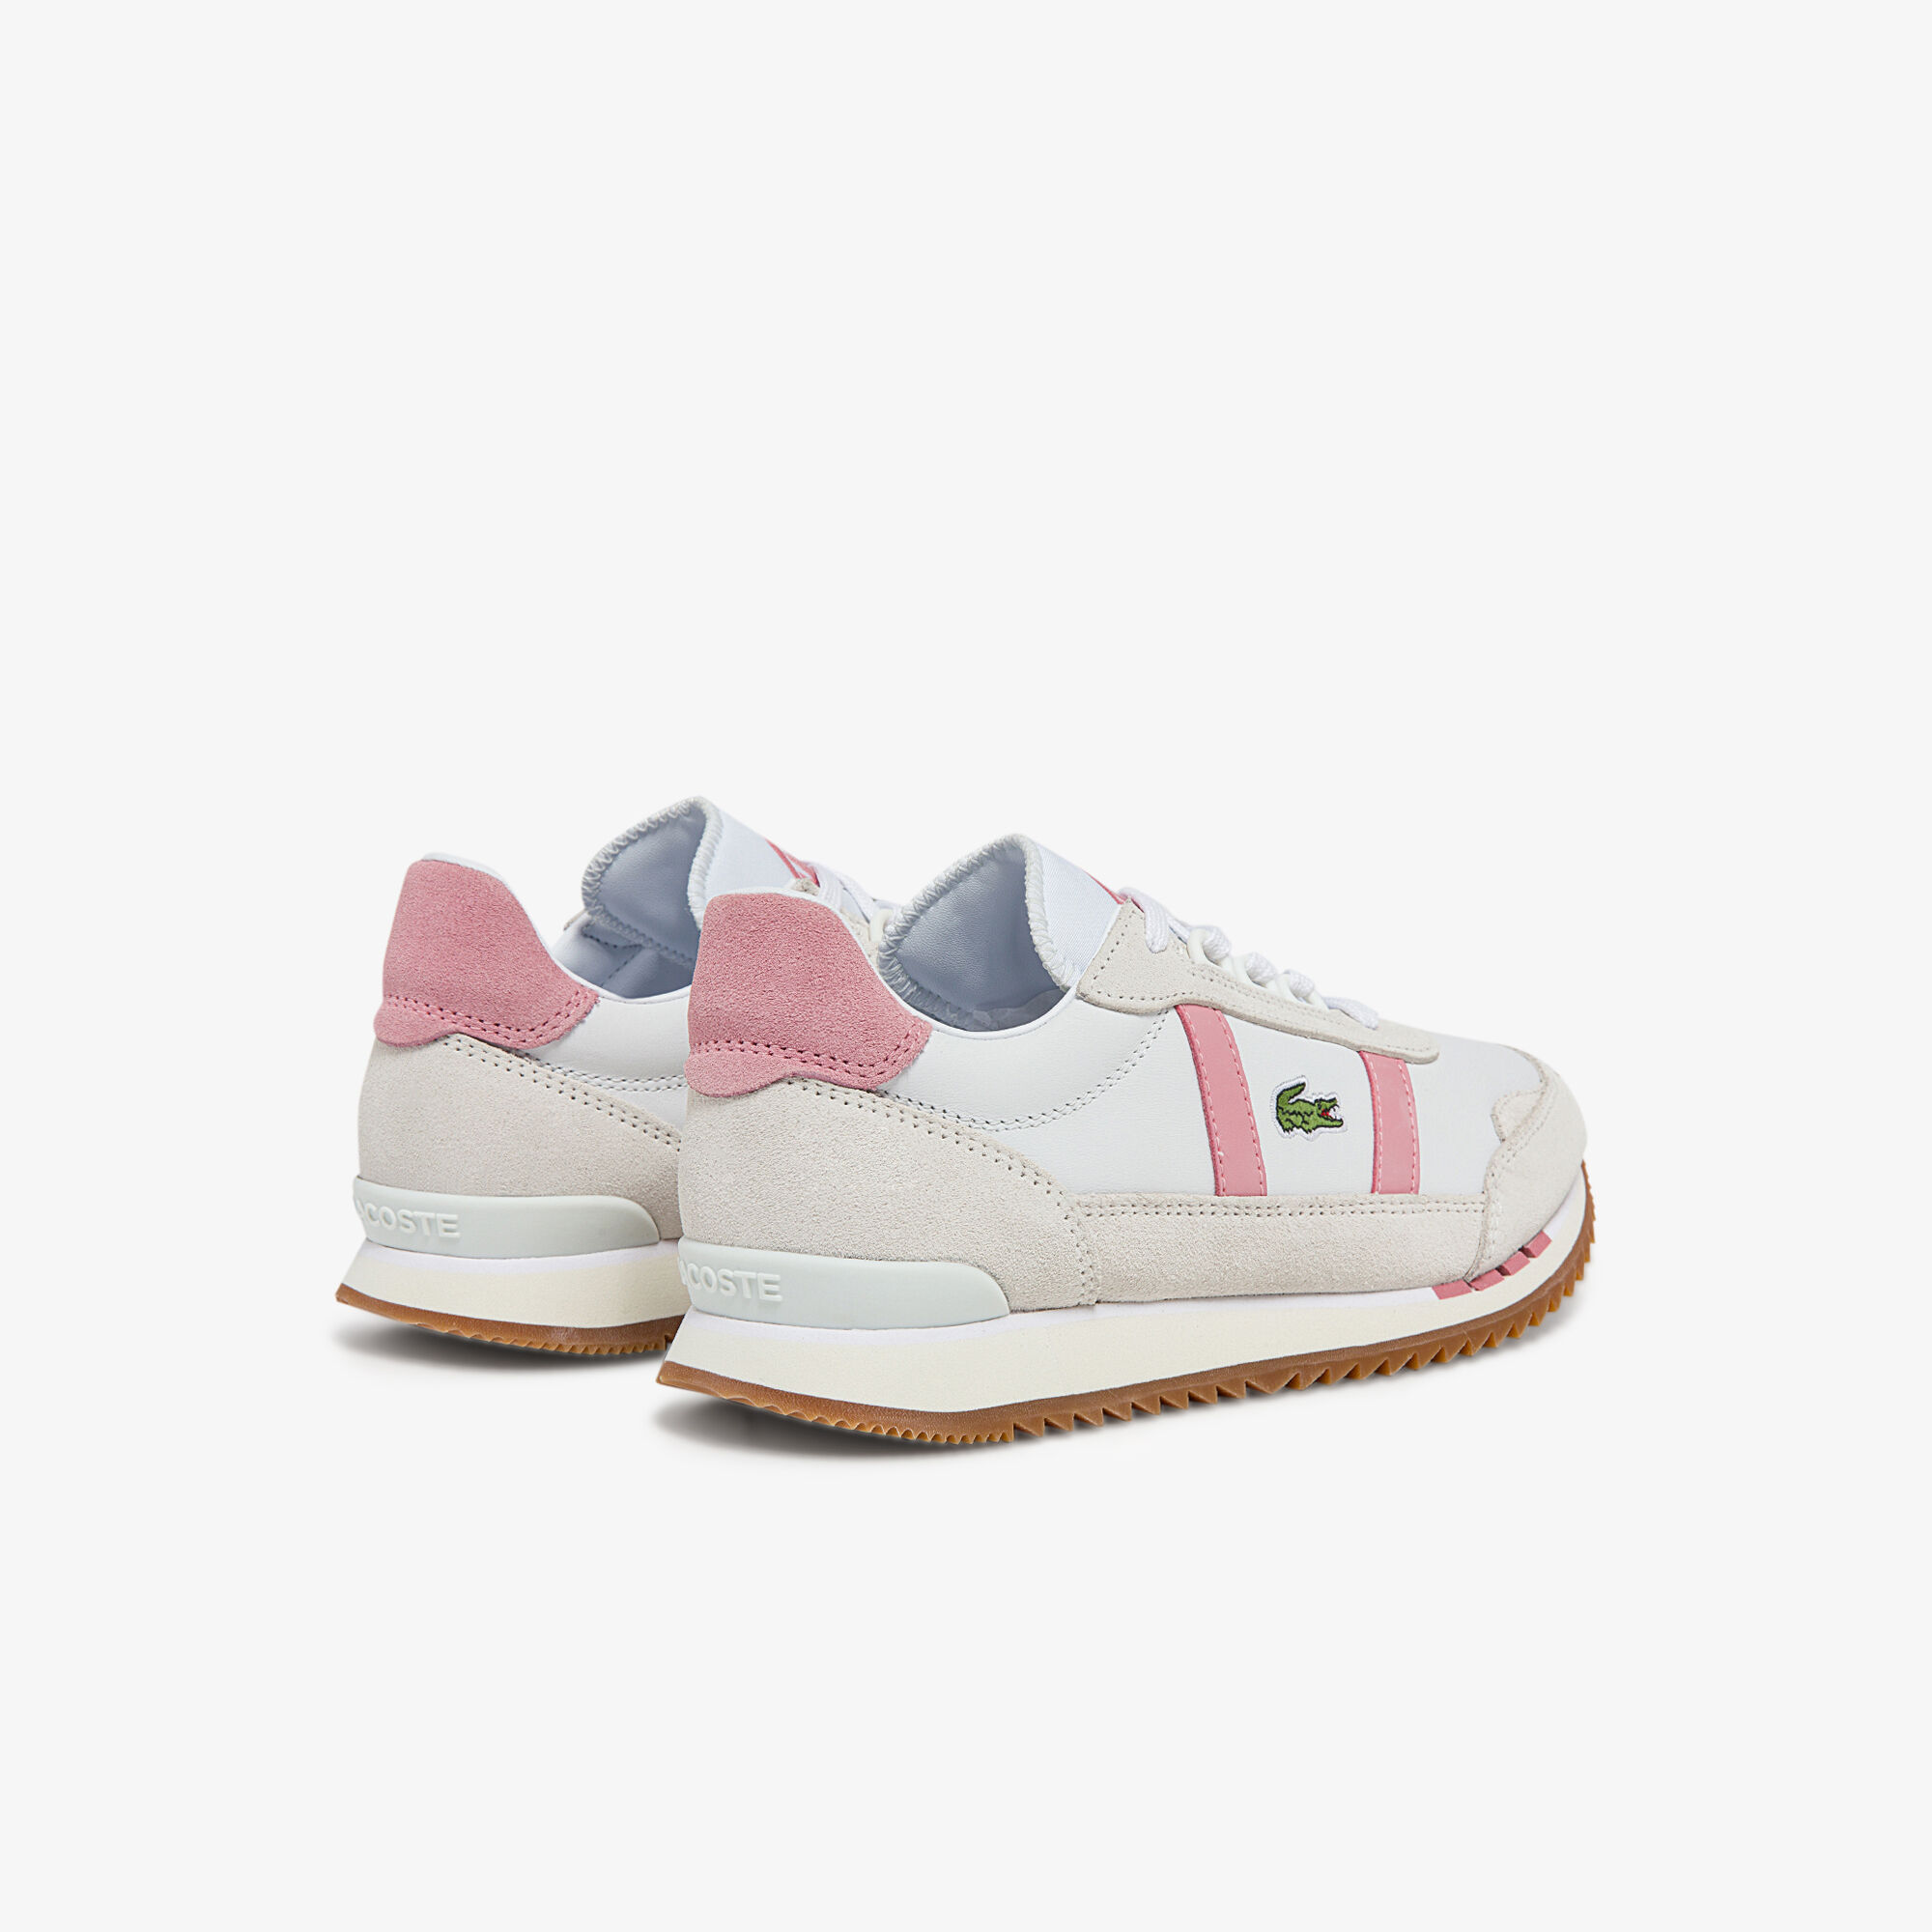 Women's Partner Retro Leather and Suede Colour-Pop Trainers